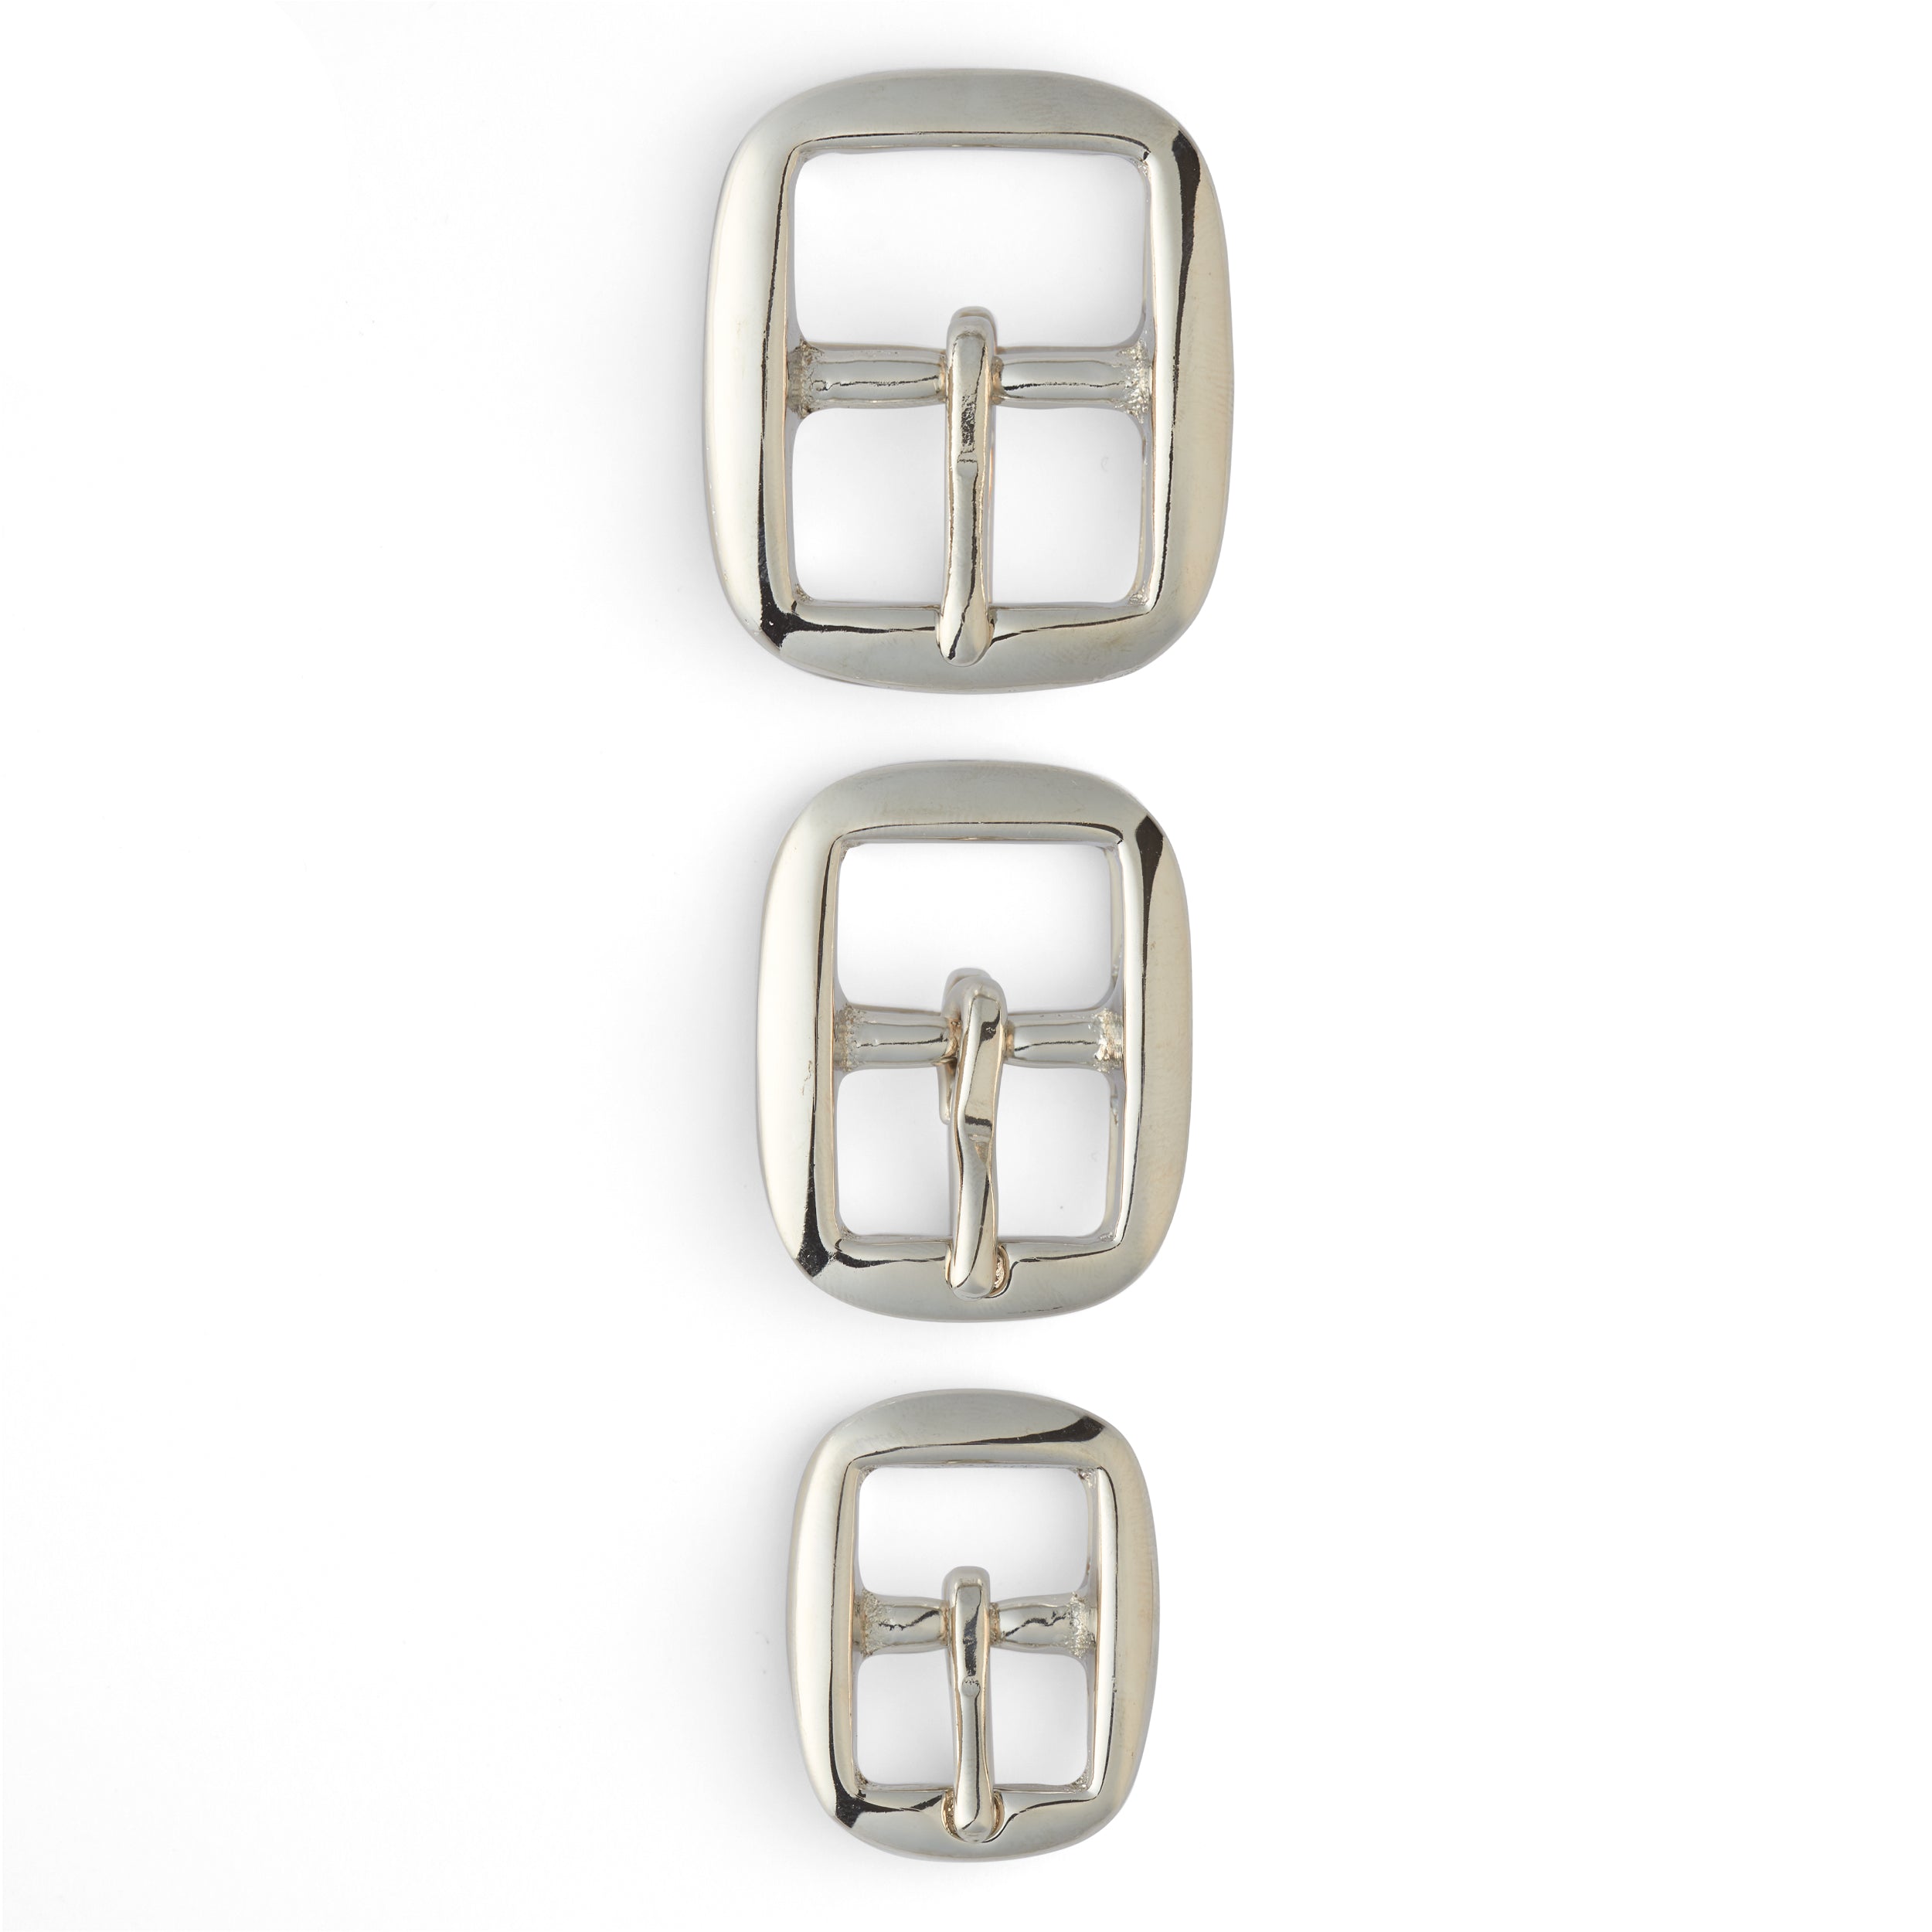 Square Round Bridle Buckle